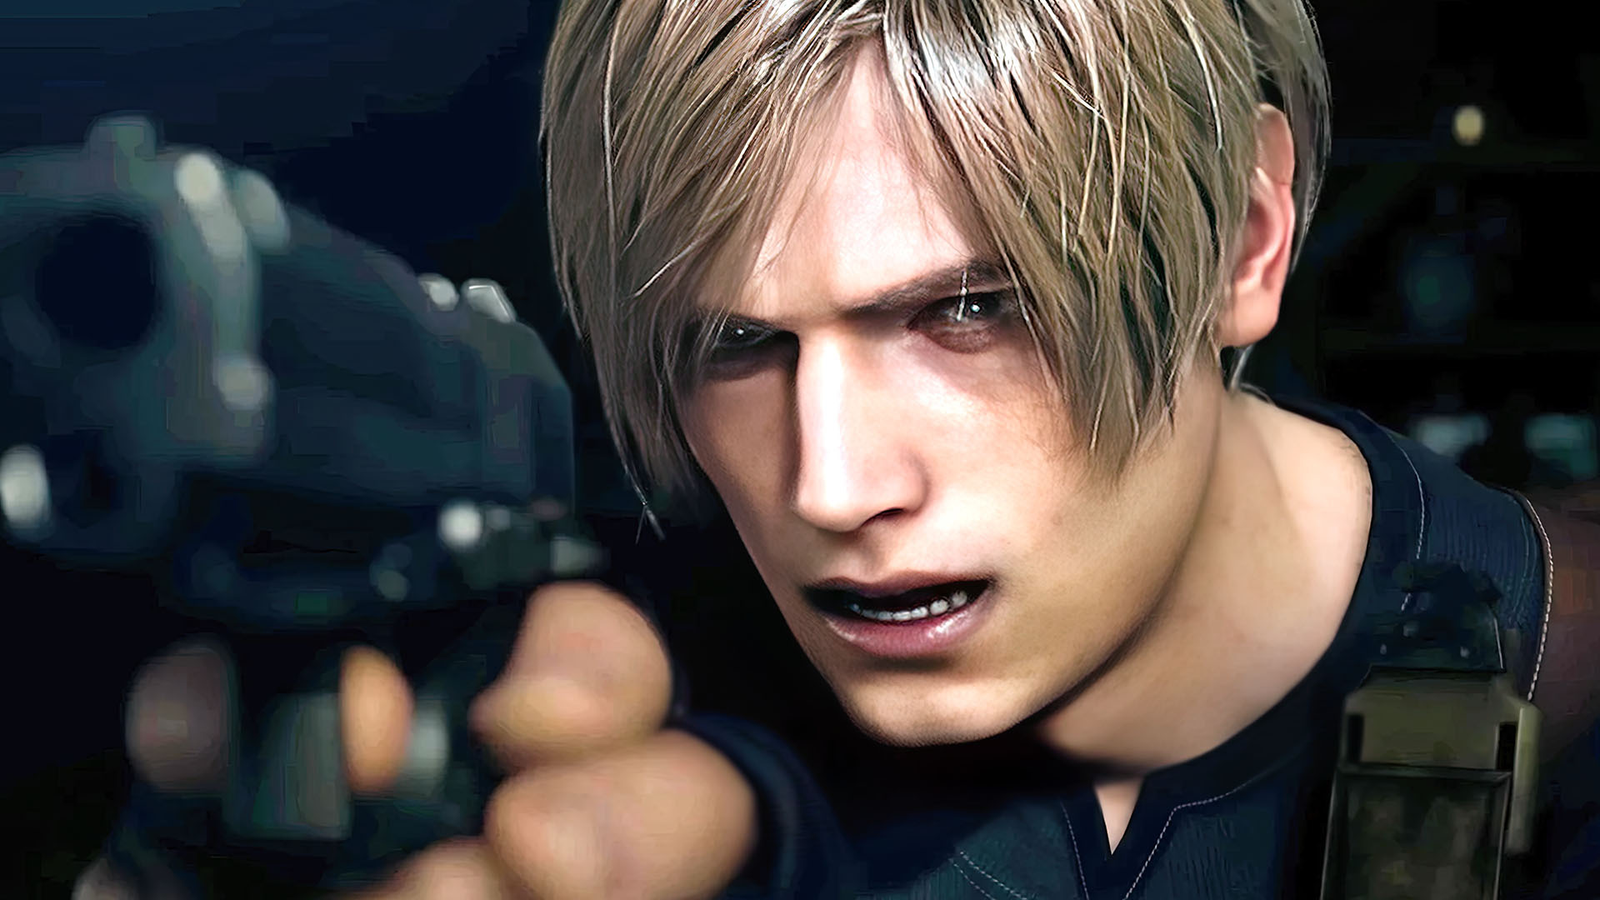 Resident Evil 4 remake: do technical troubles doom a would-be classic?